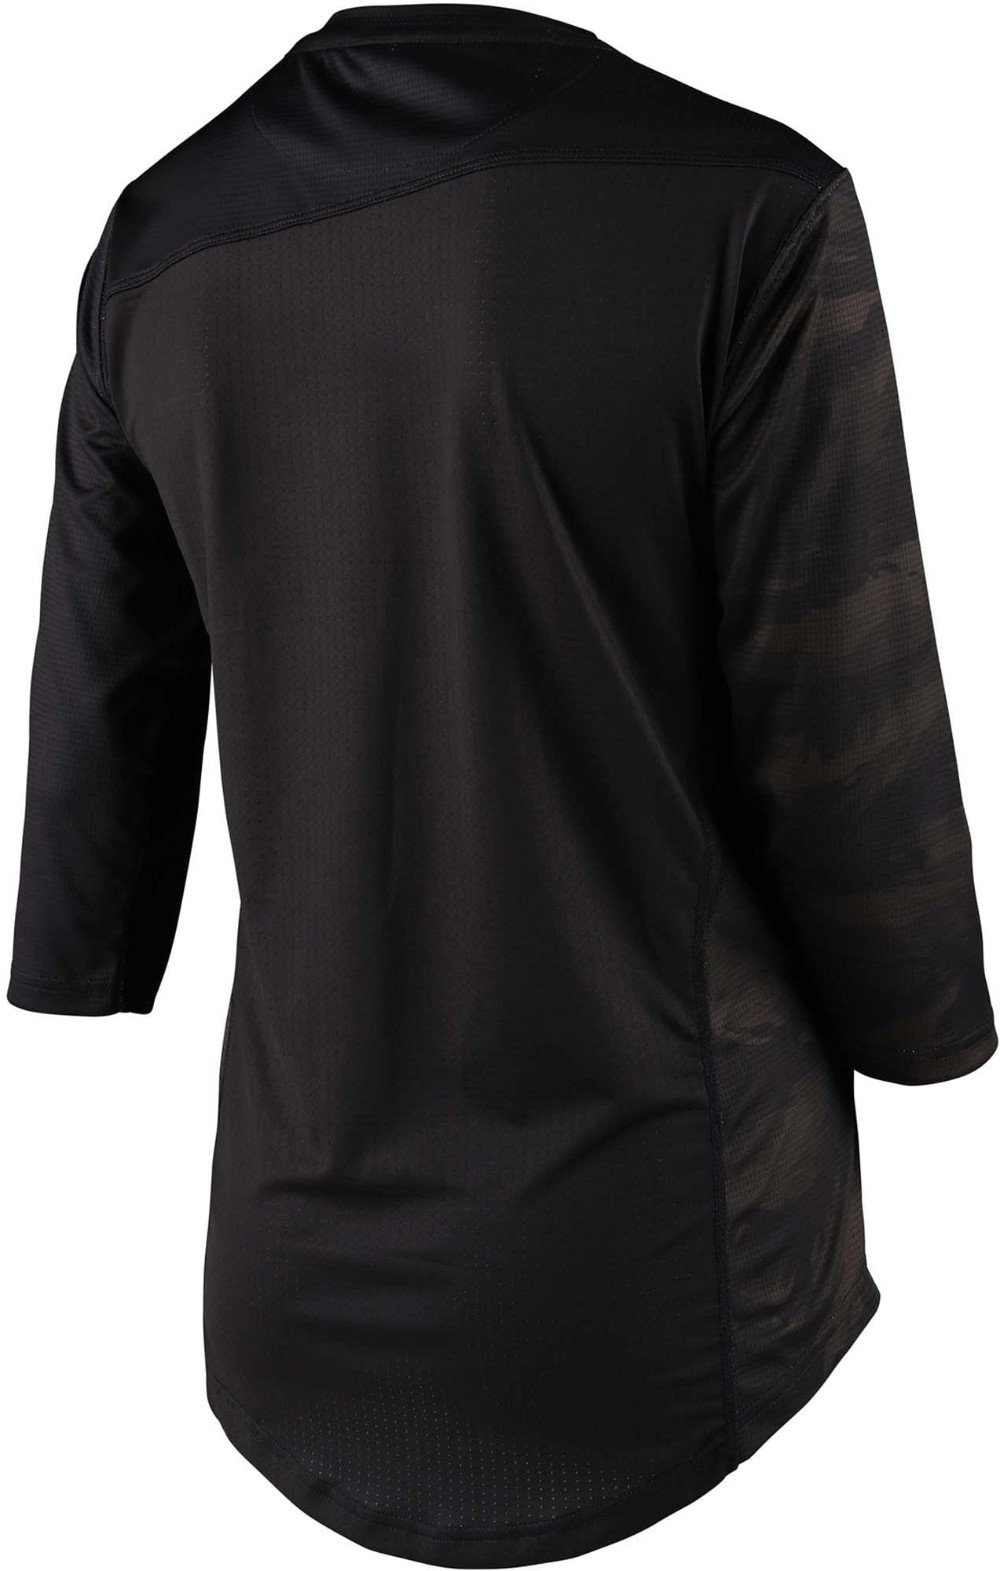 Mischief Womens 3/4 Sleeve MTB Cycling Jersey image 1